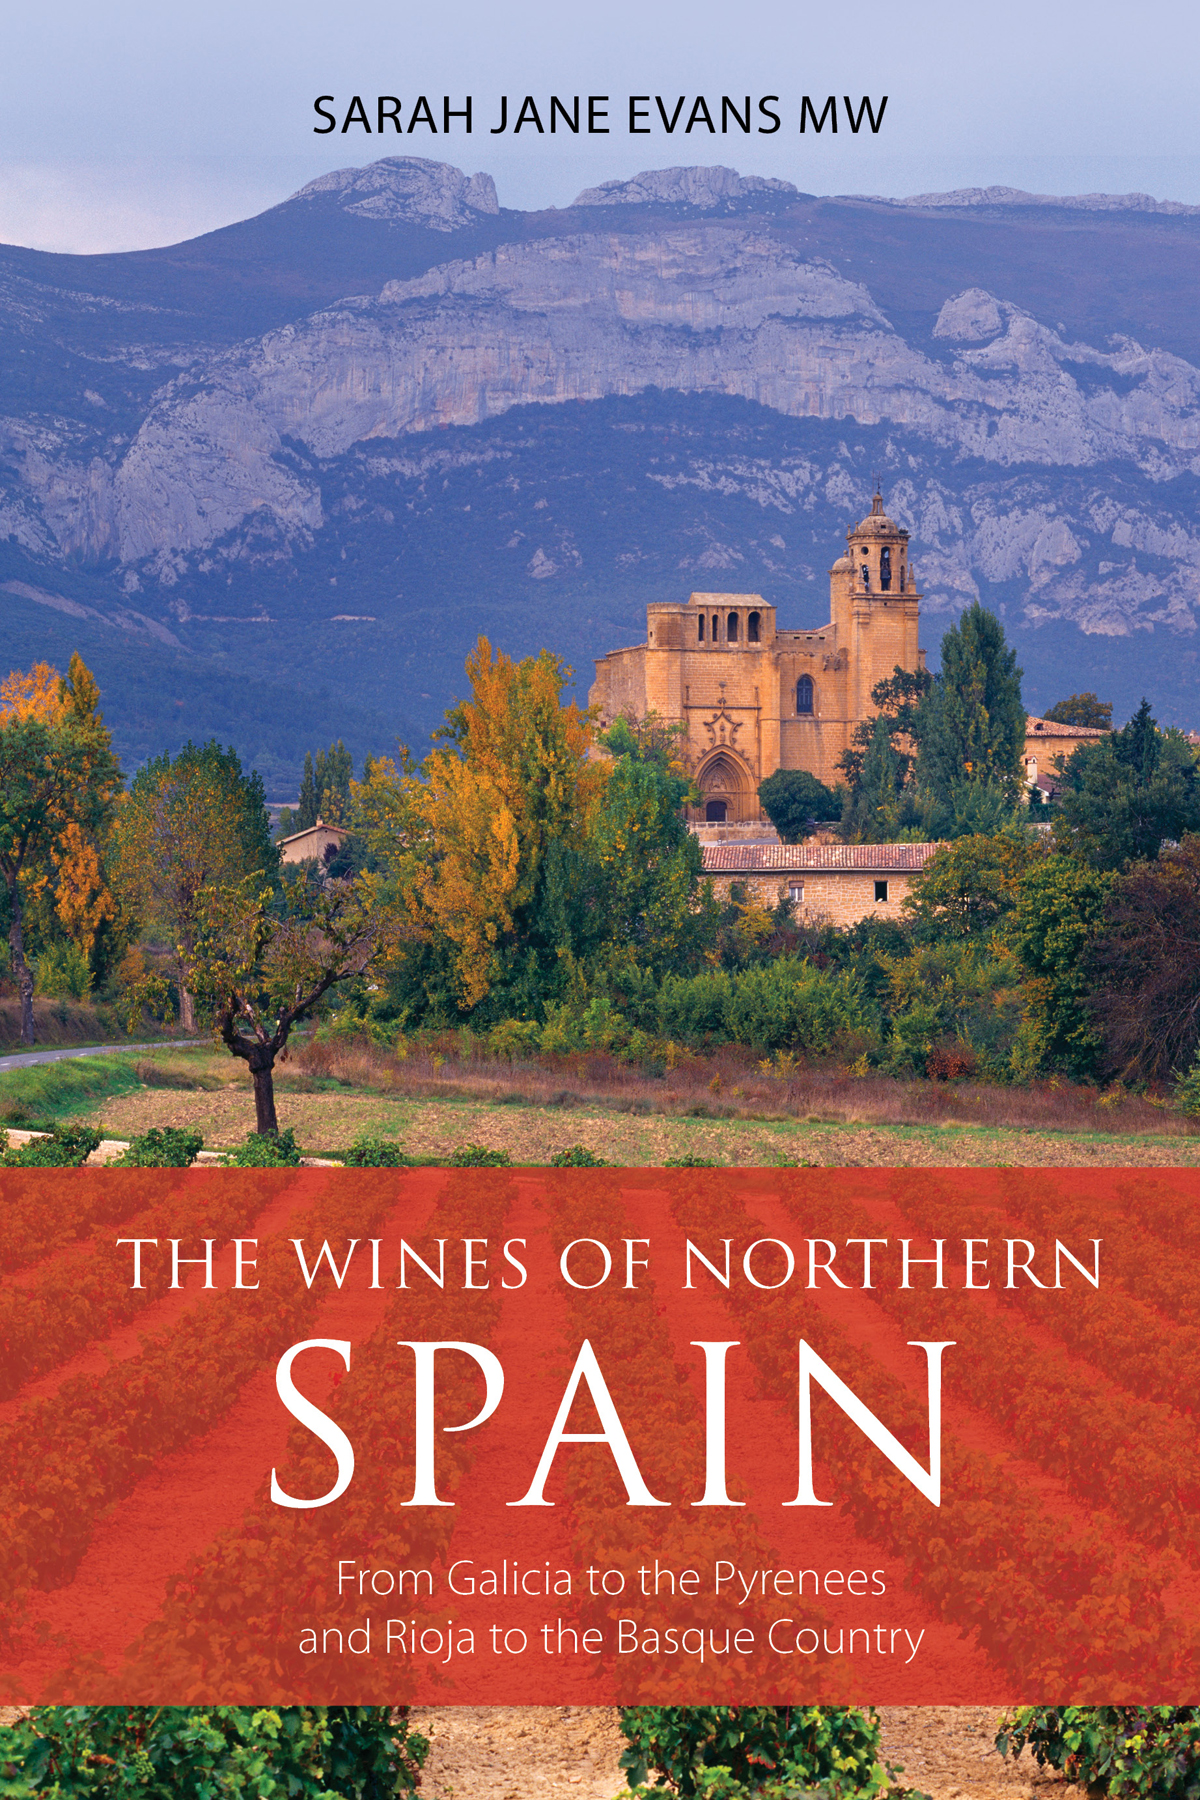 Extract: The wines of northern Spain by Sarah Jane Evans MW